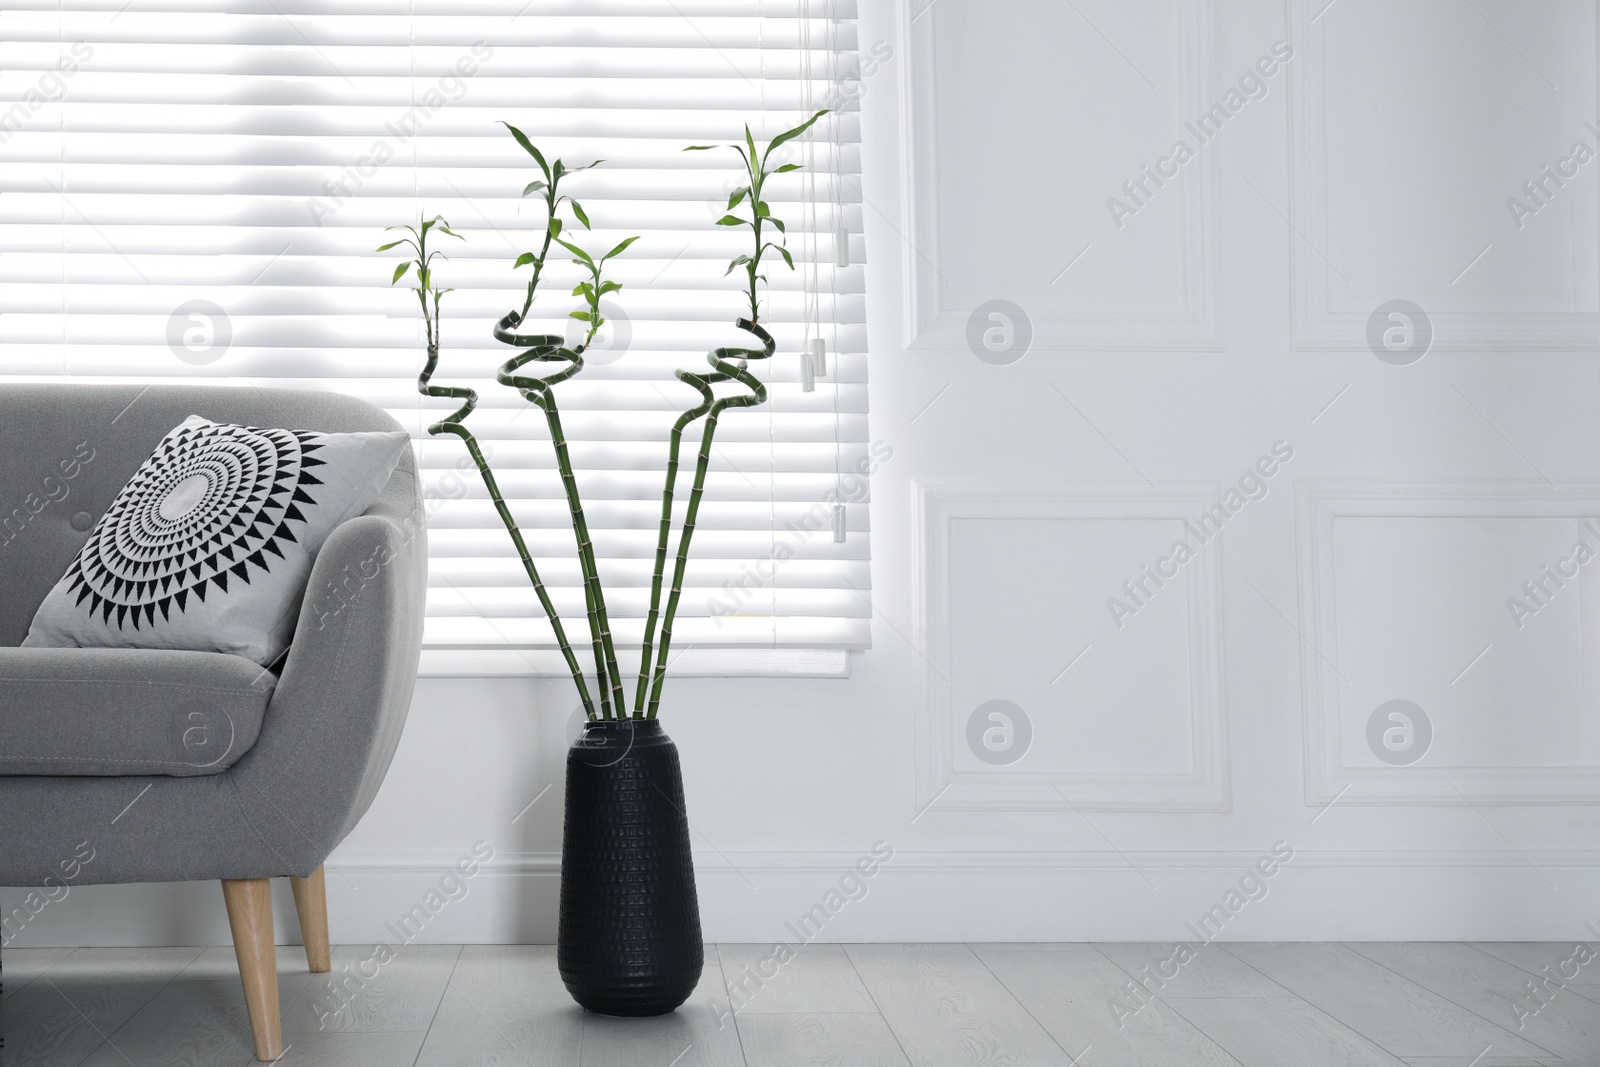 Photo of Vase with green bamboo stems near sofa in living room interior. Space for text